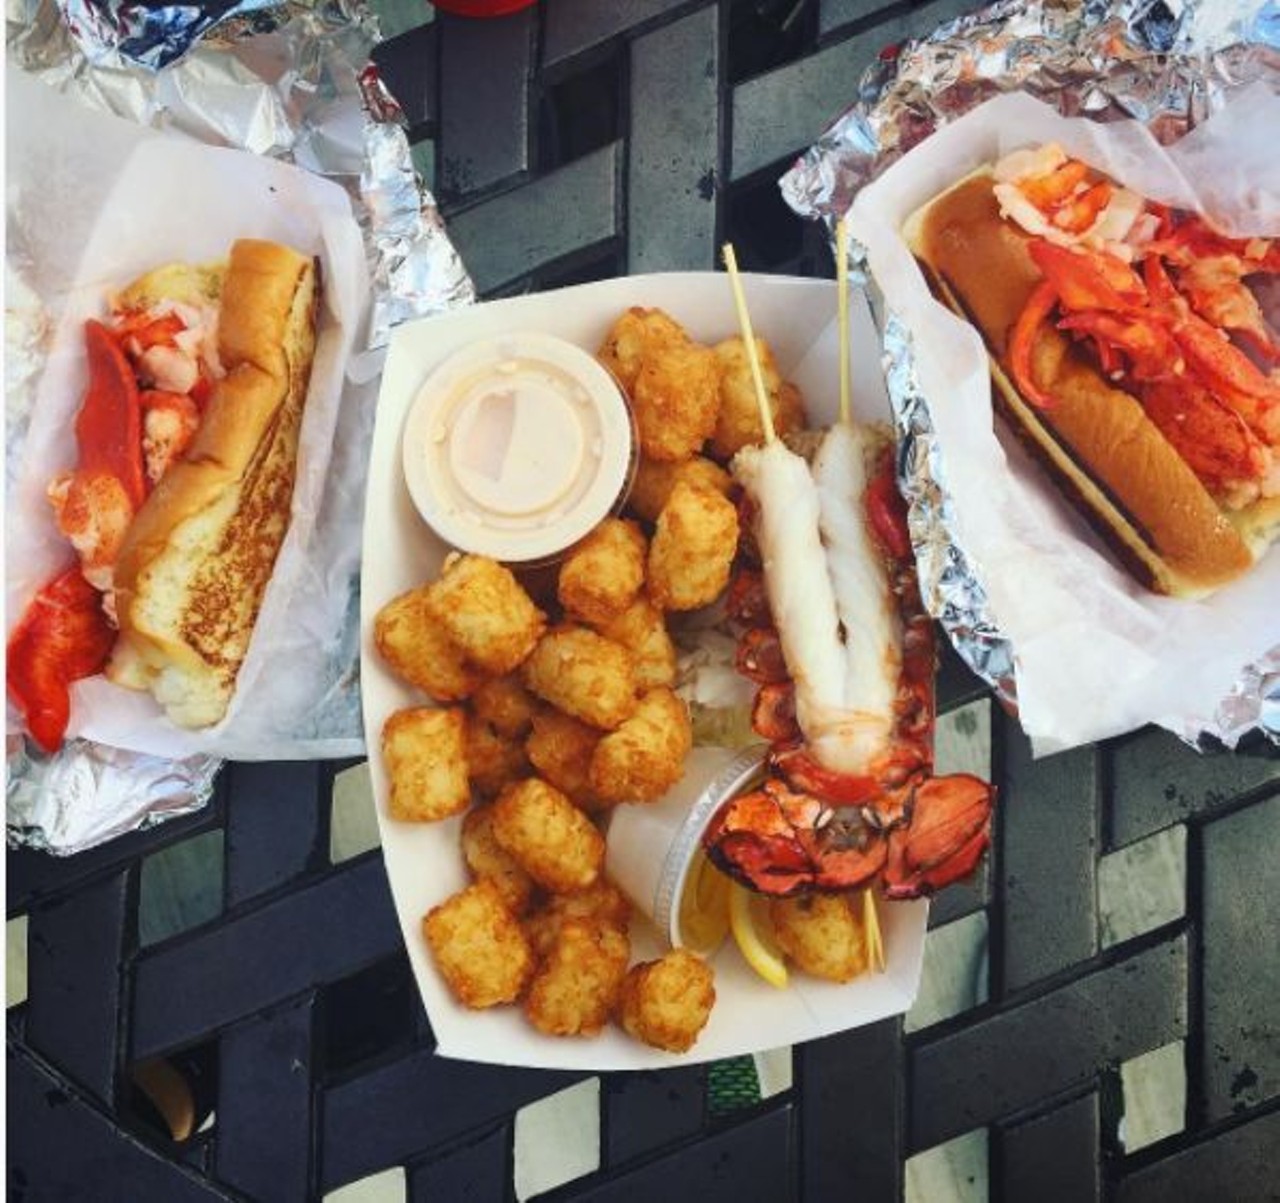 Cousins Maine Lobster
(210) 951-8922,
facebook.com/CMLobsterSanAntonio/
Got a hankering for some lobster? Cousin Main offers the best lobster dishes on wheels.
Photo via Instagram
katiedellenback 
